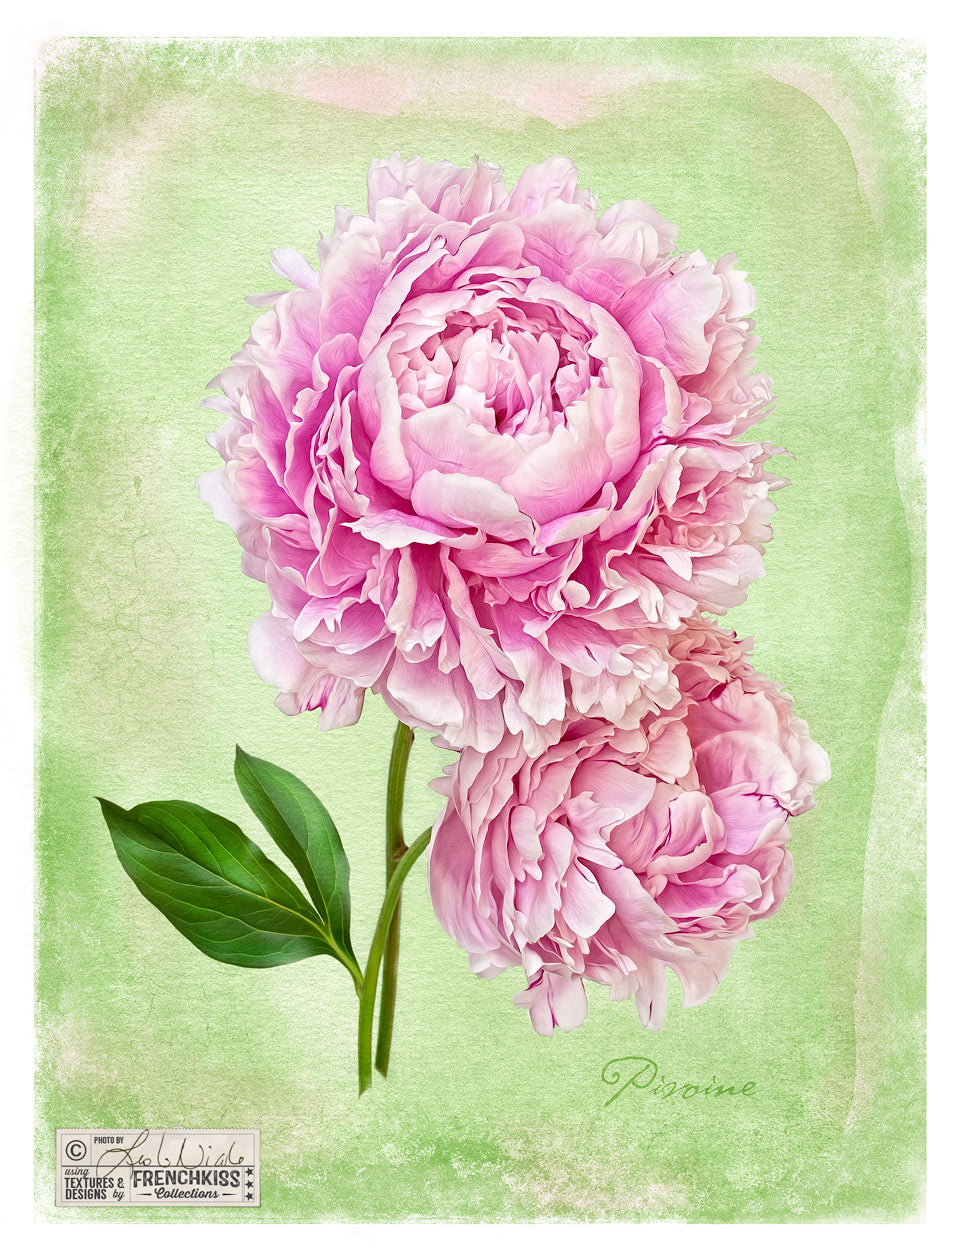 Botanical style peony photograph with a watercolor texture by Leslie Nicole.